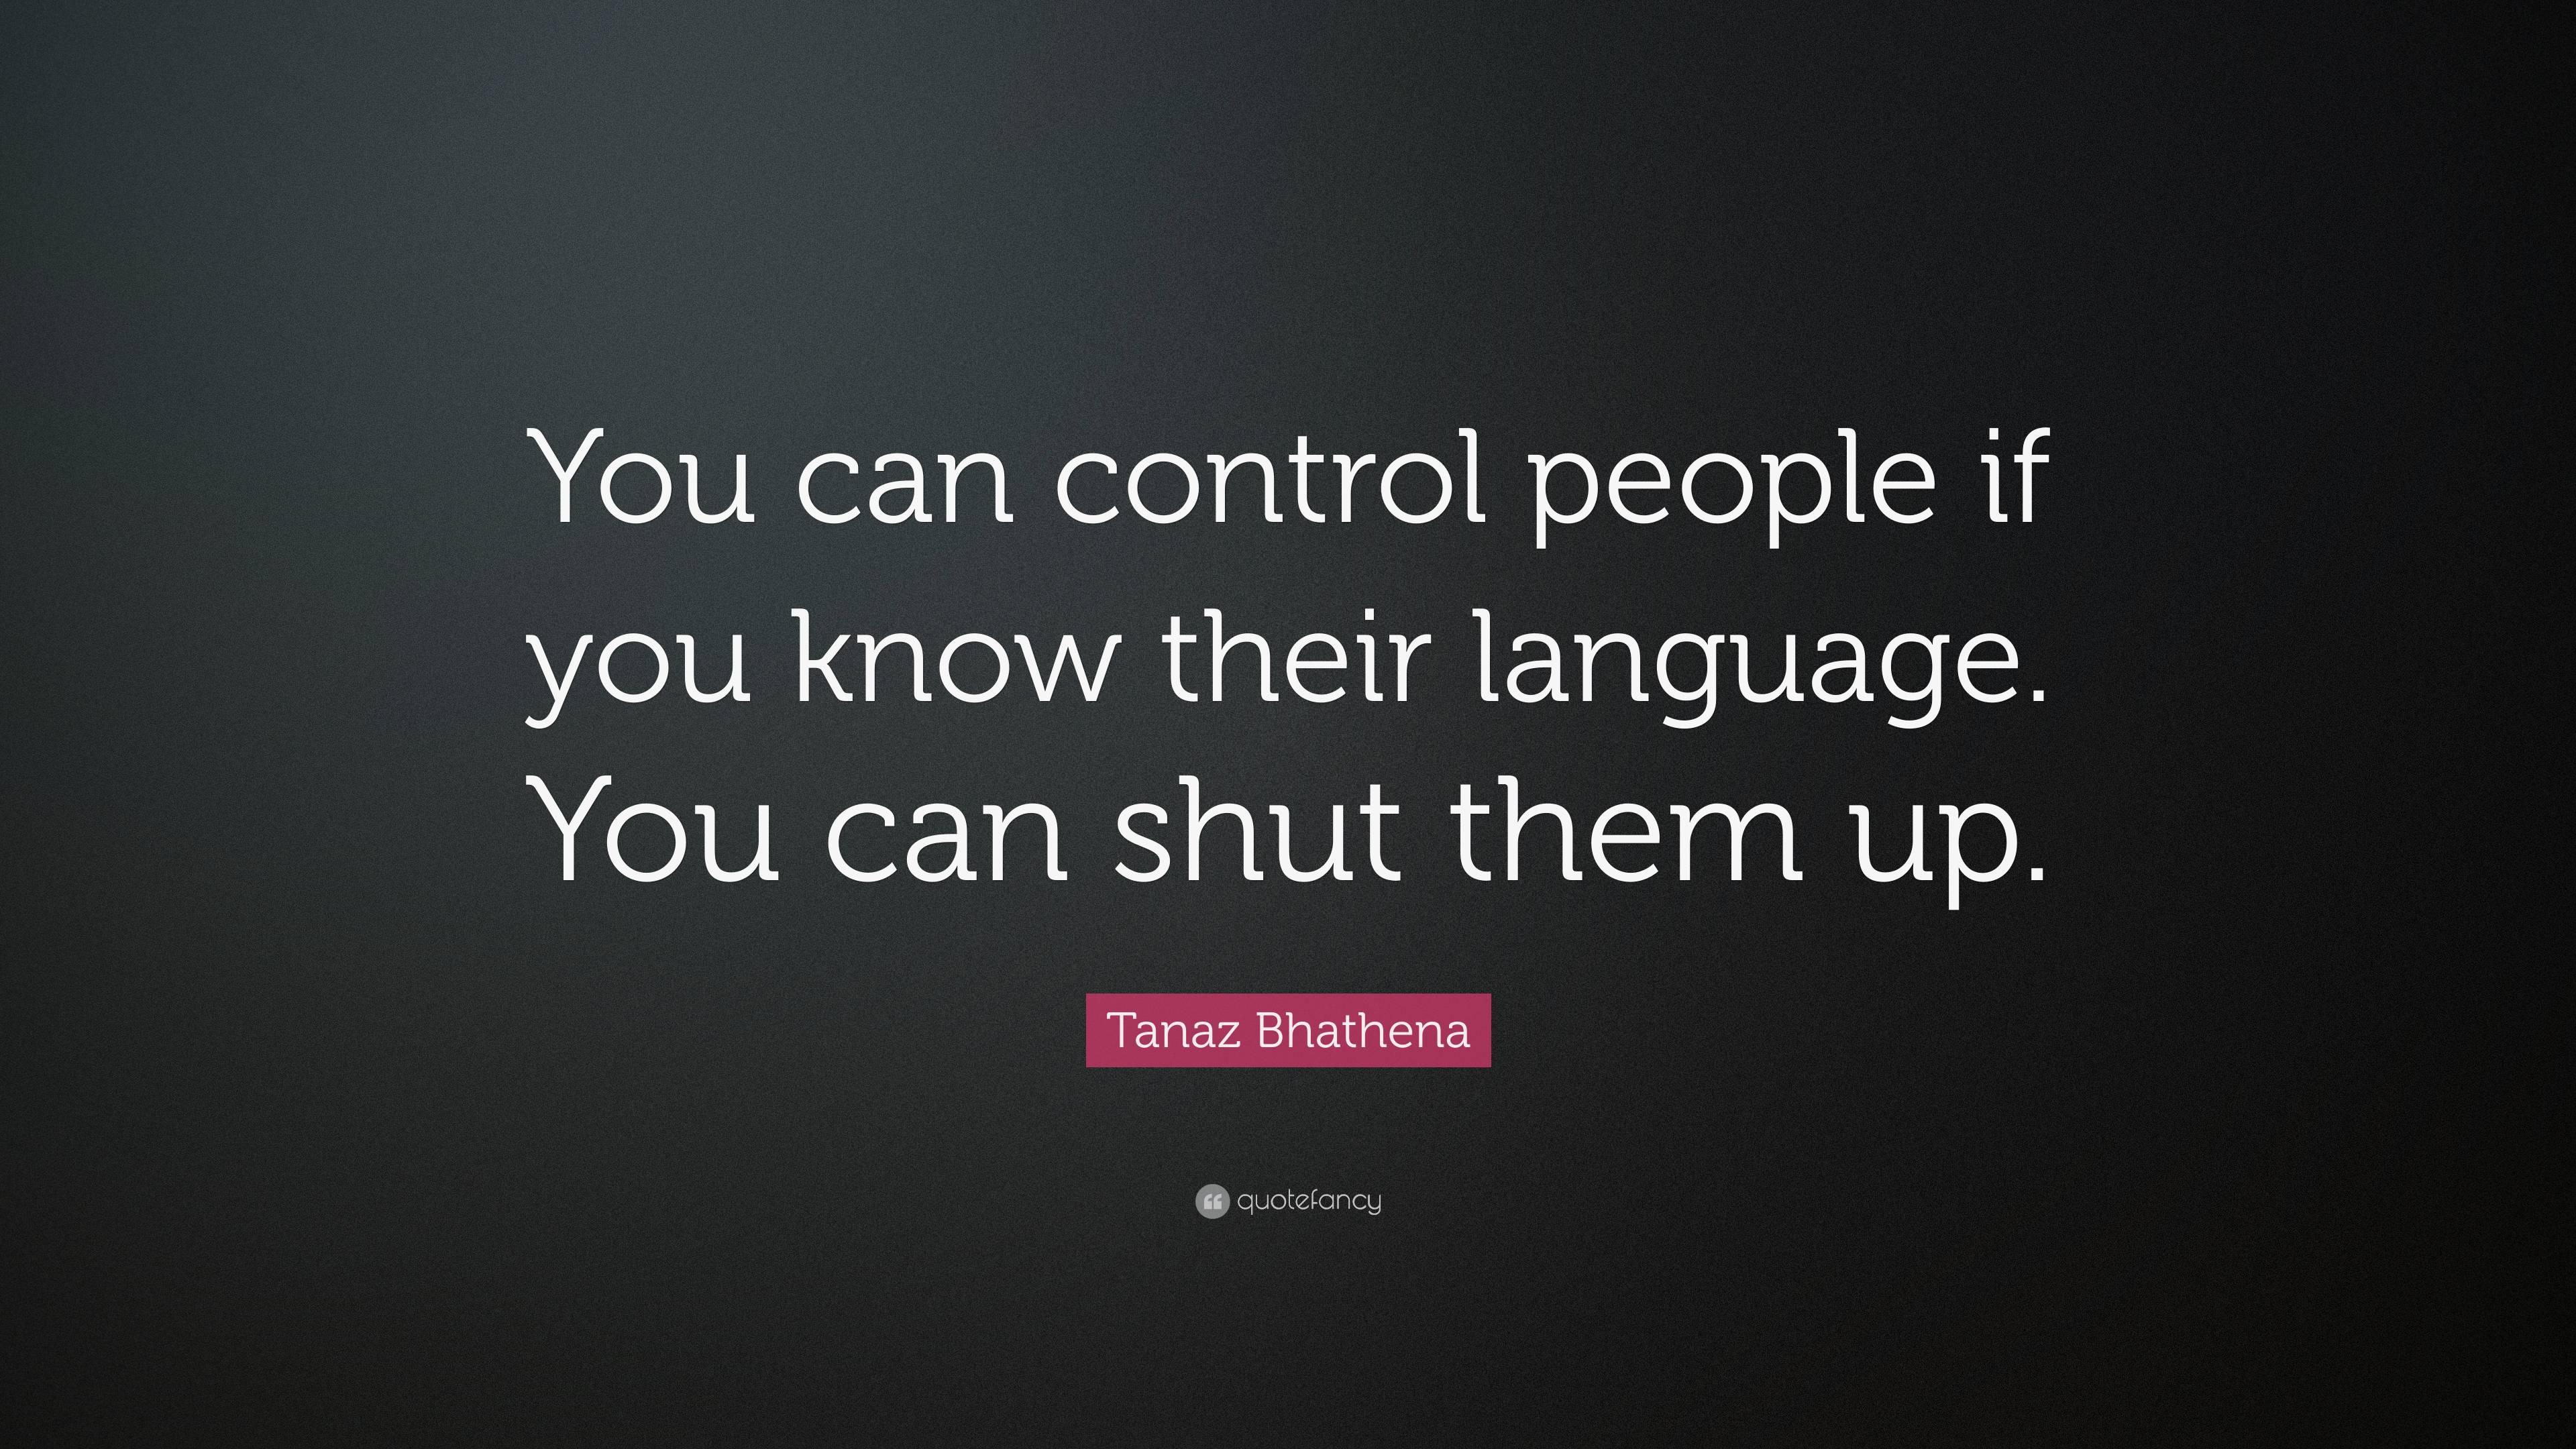 Tanaz Bhathena Quote: “You can control people if you know their ...